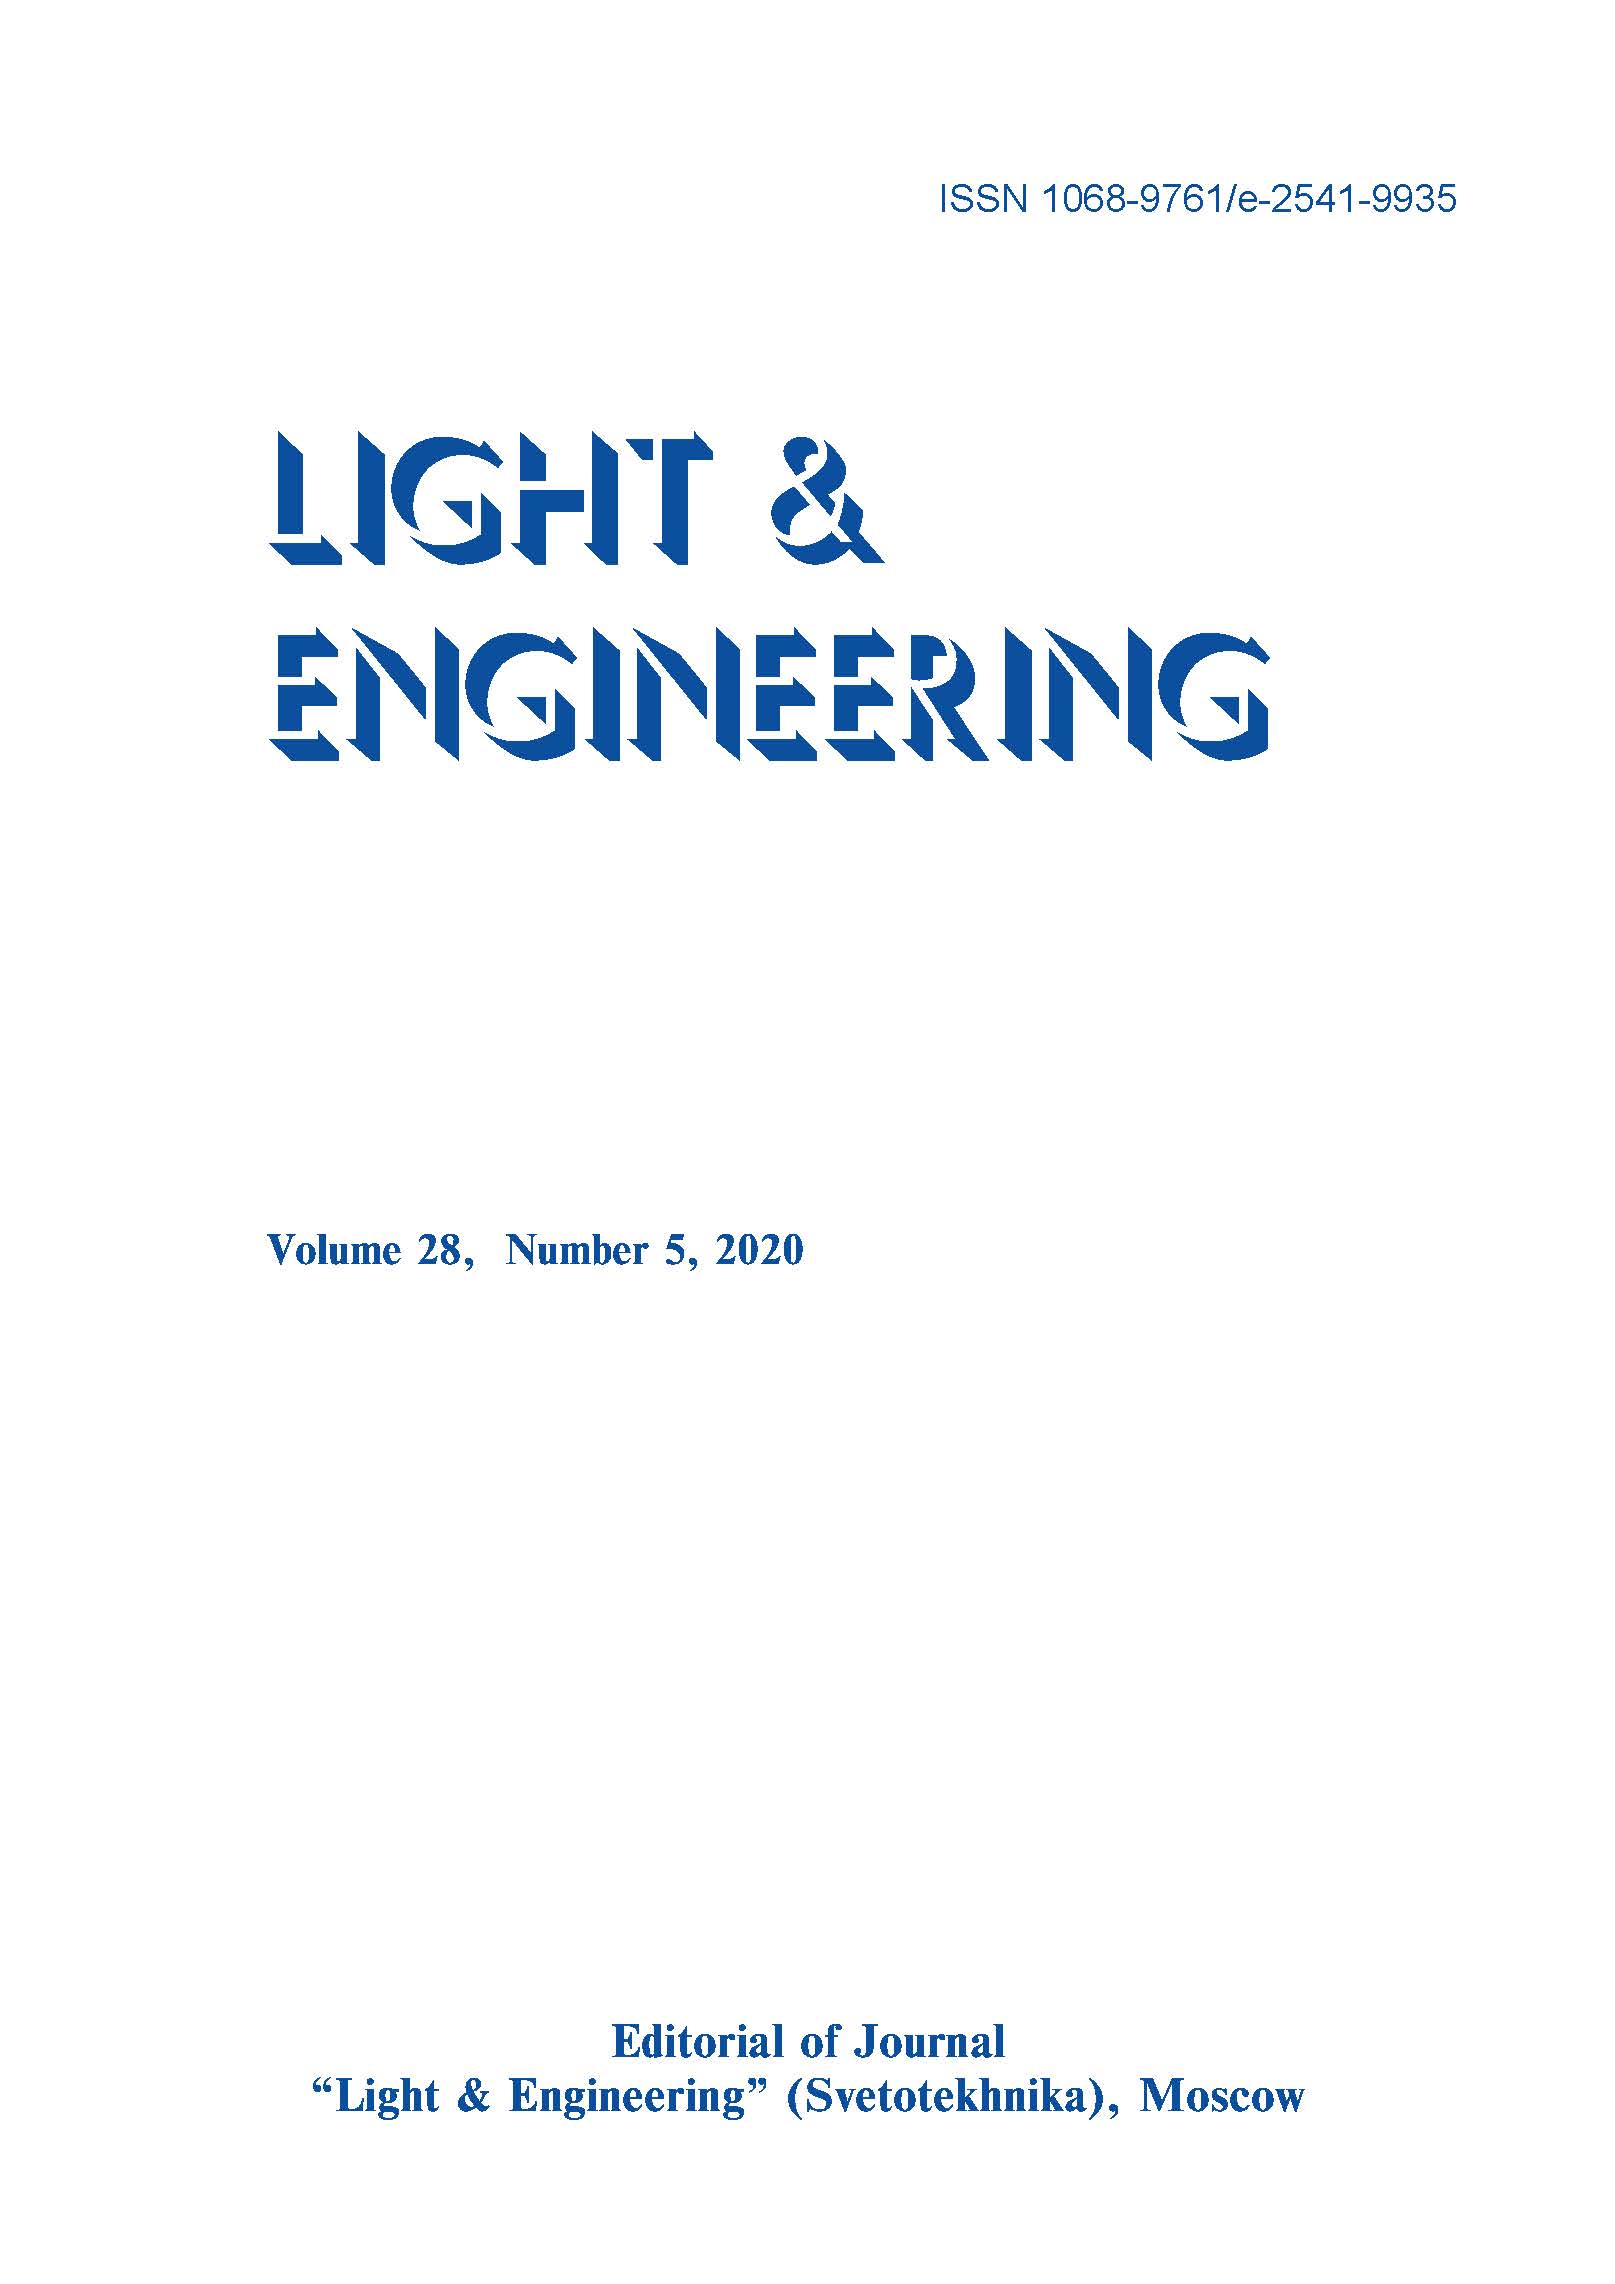 Application Of The Sah-noyce-shockley Recombination Mechanism To The Model Of The Voltagecurrent Relationship Of Led Structures With Quantum Wells Light & Engineering Vol. 28, No. 5